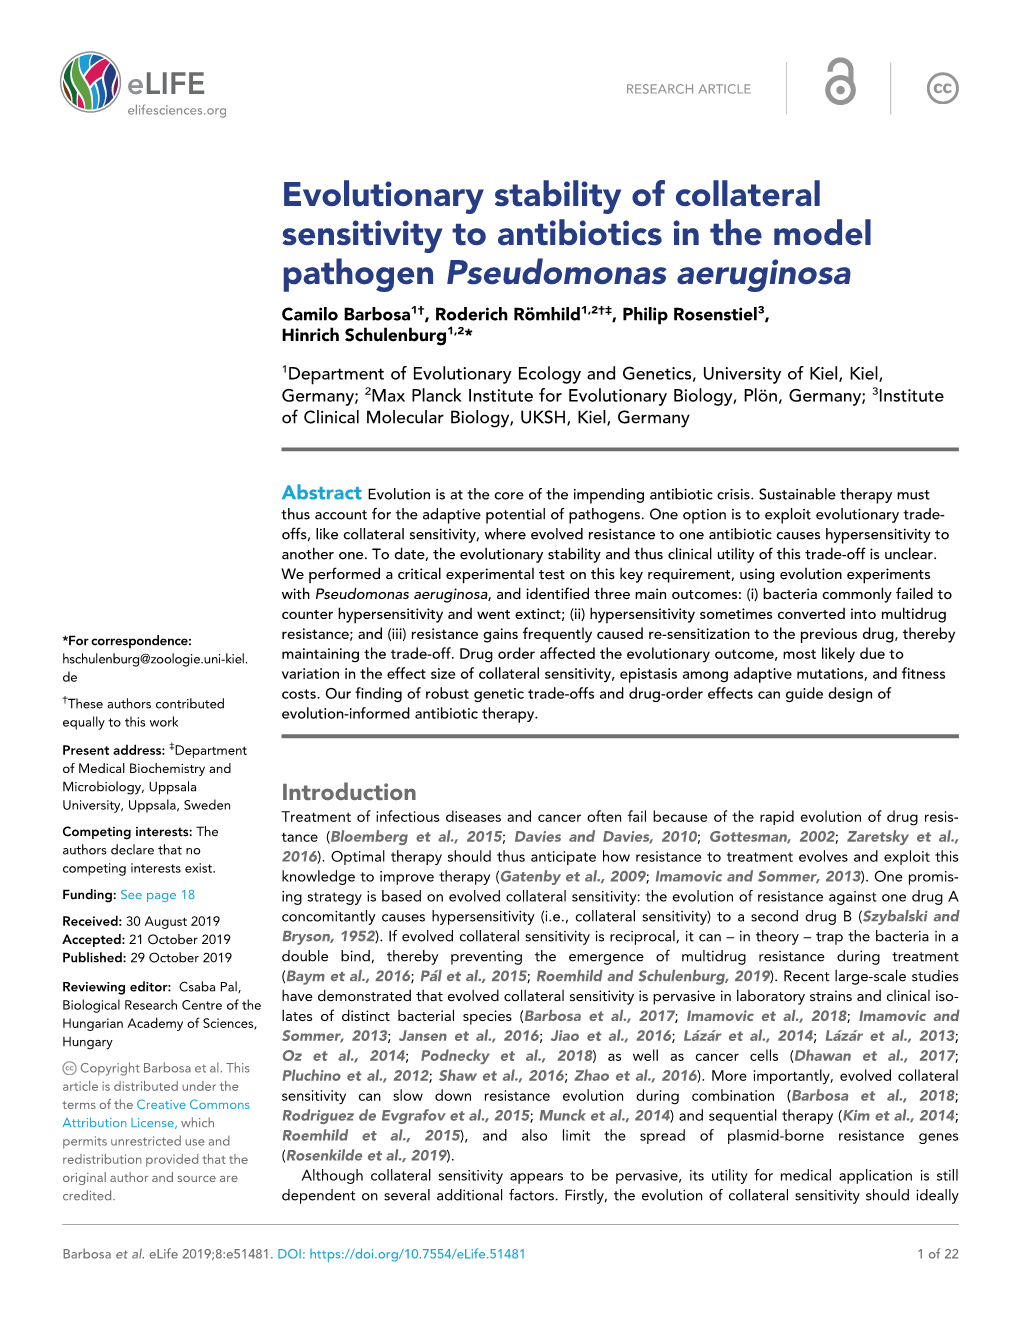 Evolutionary Stability of Collateral Sensitivity to Antibiotics in the Model